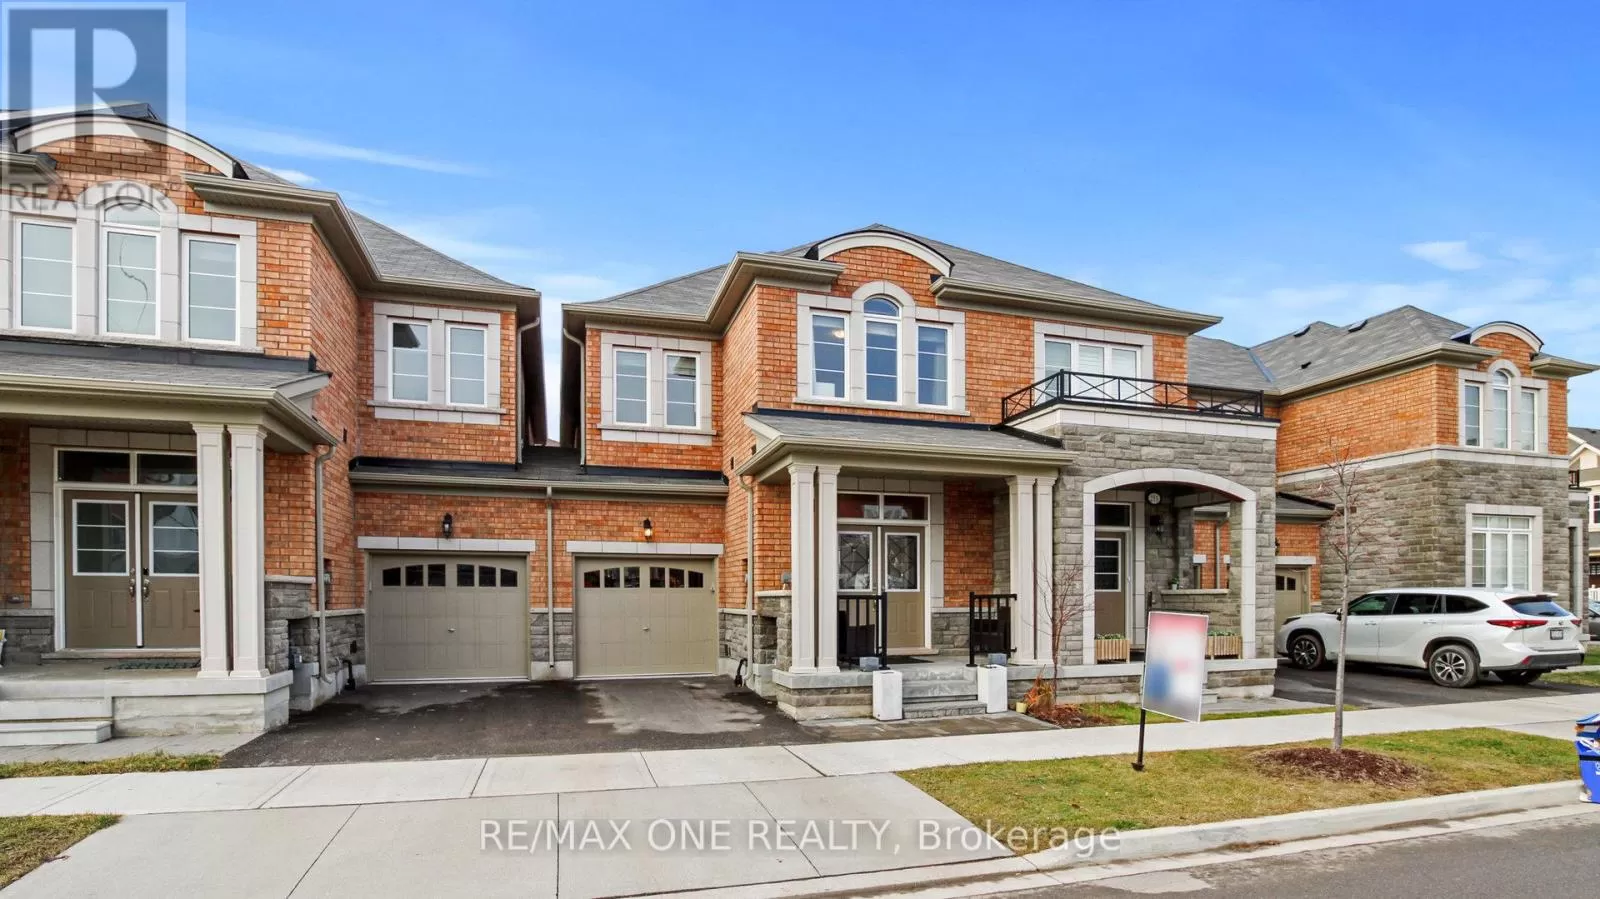 Row / Townhouse for rent: 213 Wisteria Way, Oakville, Ontario L6M 1R1